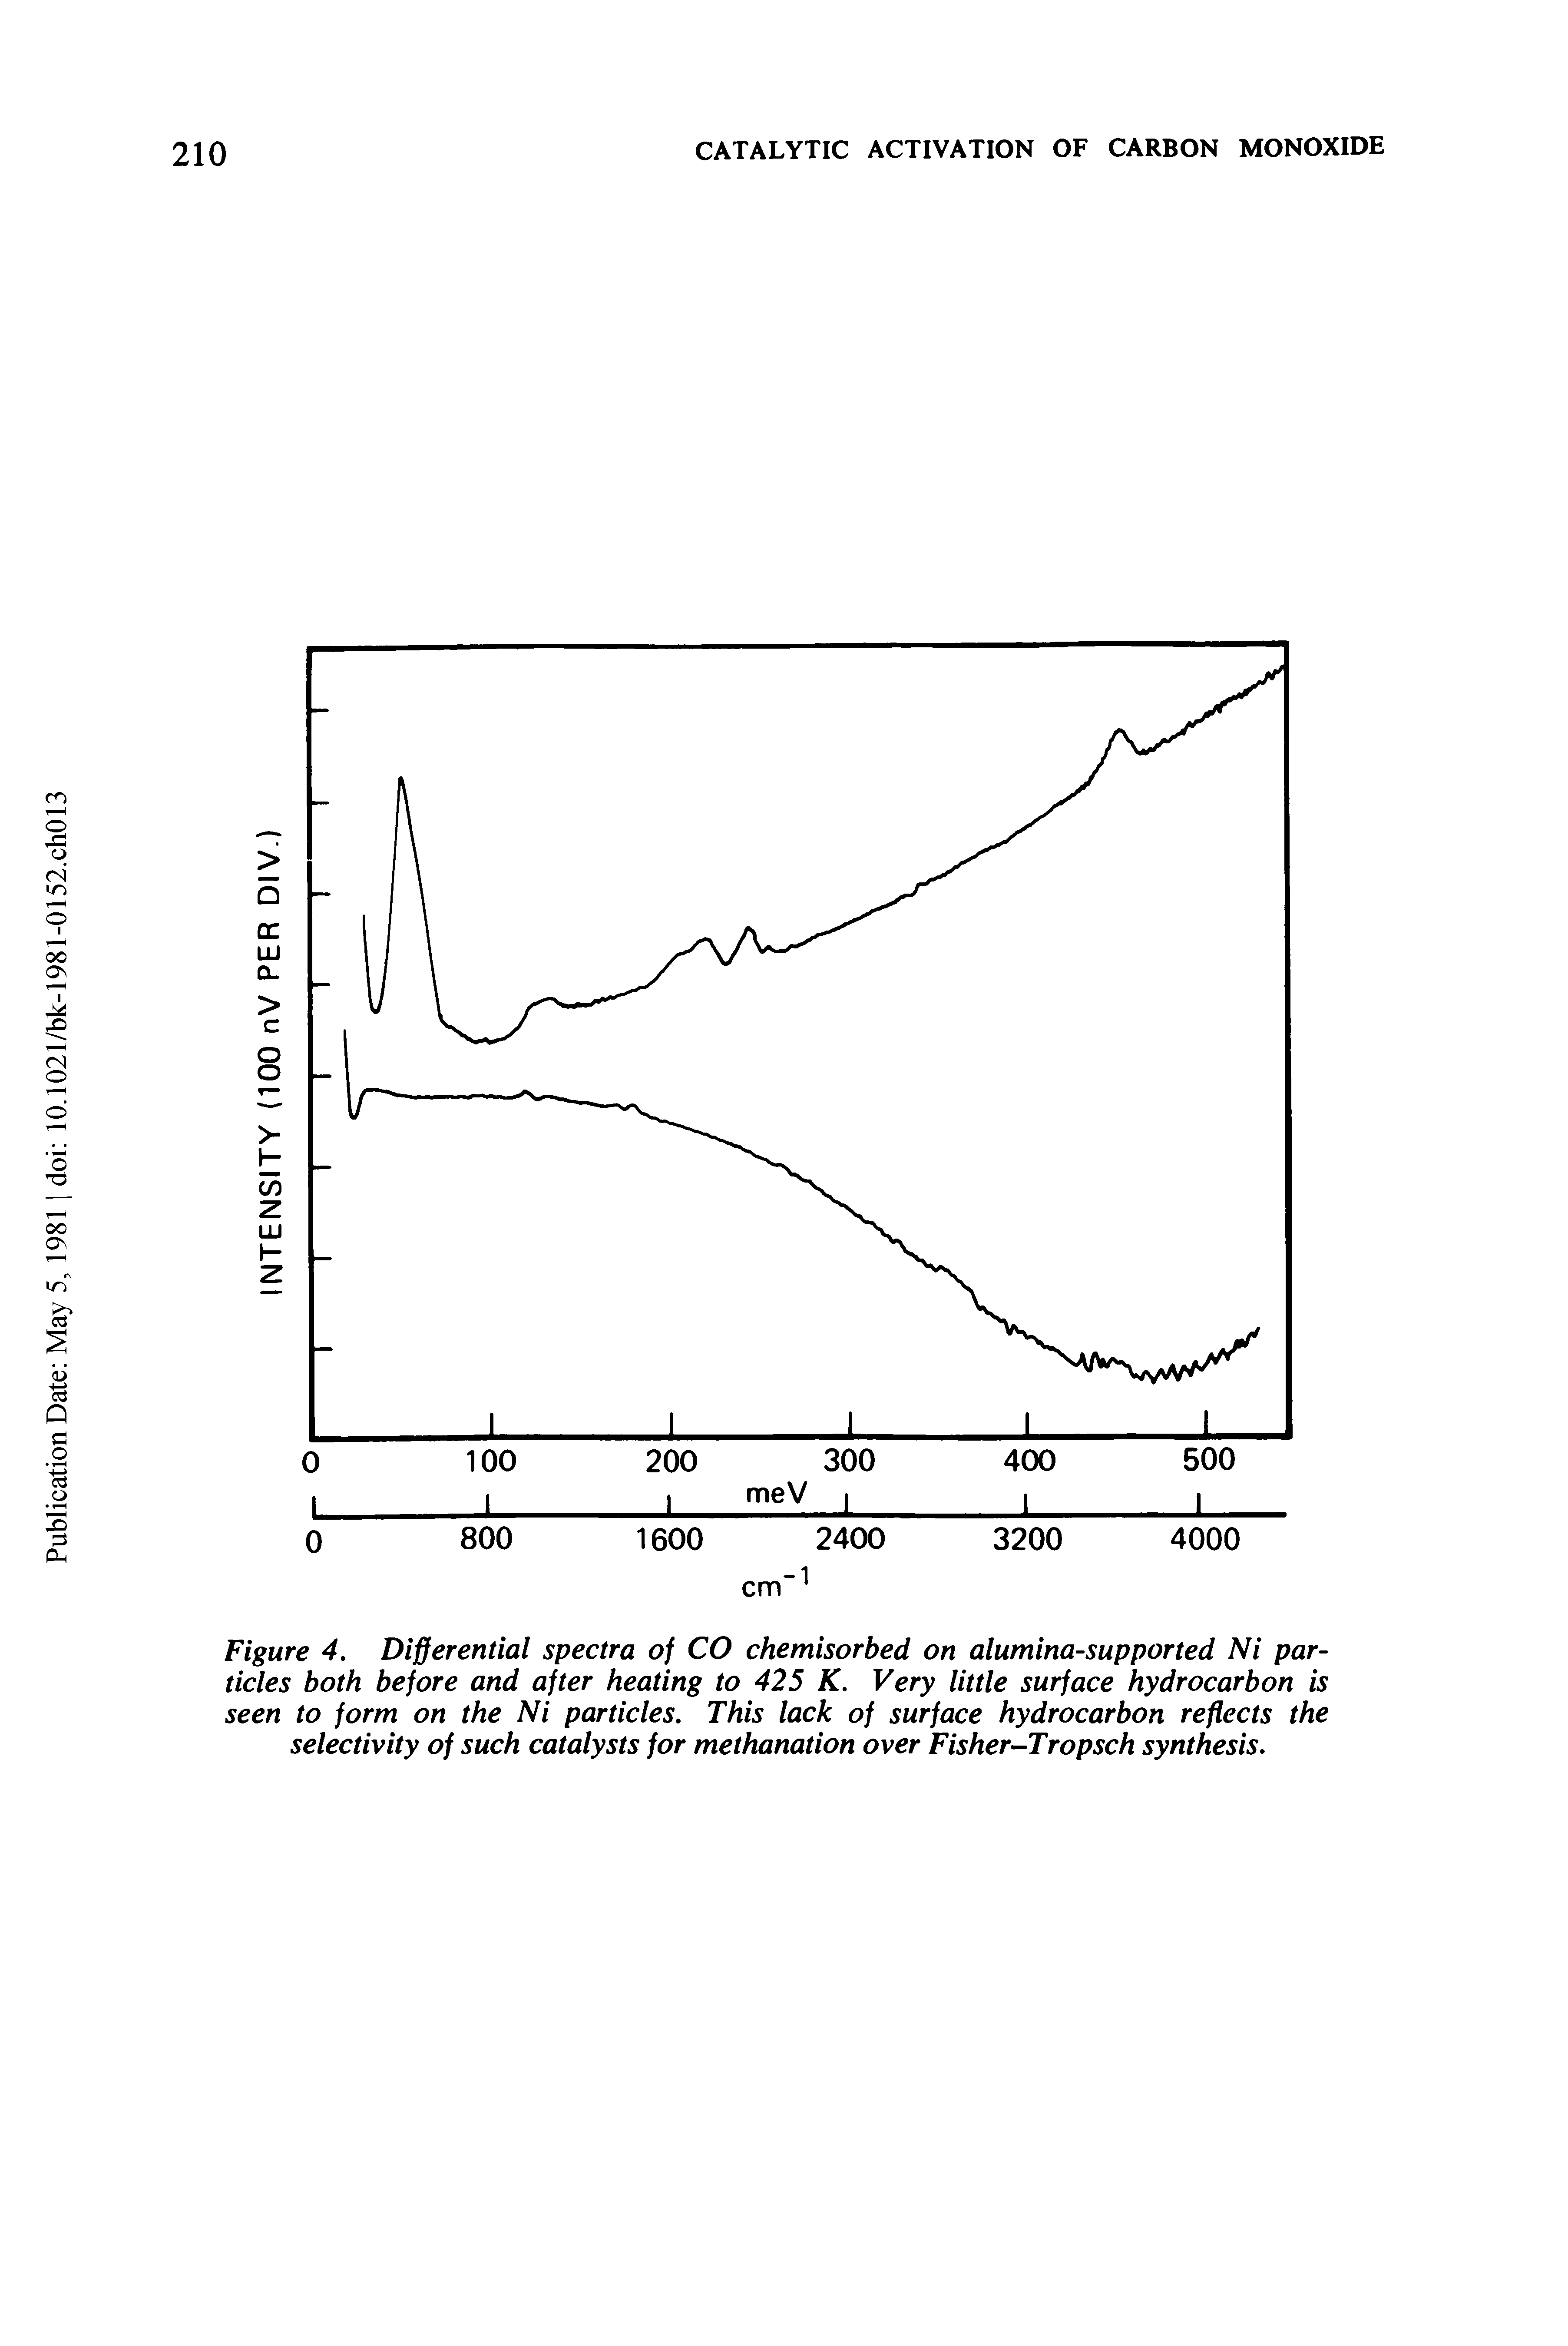 Figure 4. Differential spectra of CO chemisorbed on alumina-supported Ni particles both before and after heating to 425 K. Very little surface hydrocarbon is seen to form on the Ni particles. This lack of surface hydrocarbon reflects the selectivity of such catalysts for methanation over Fisher-Tropsch synthesis.